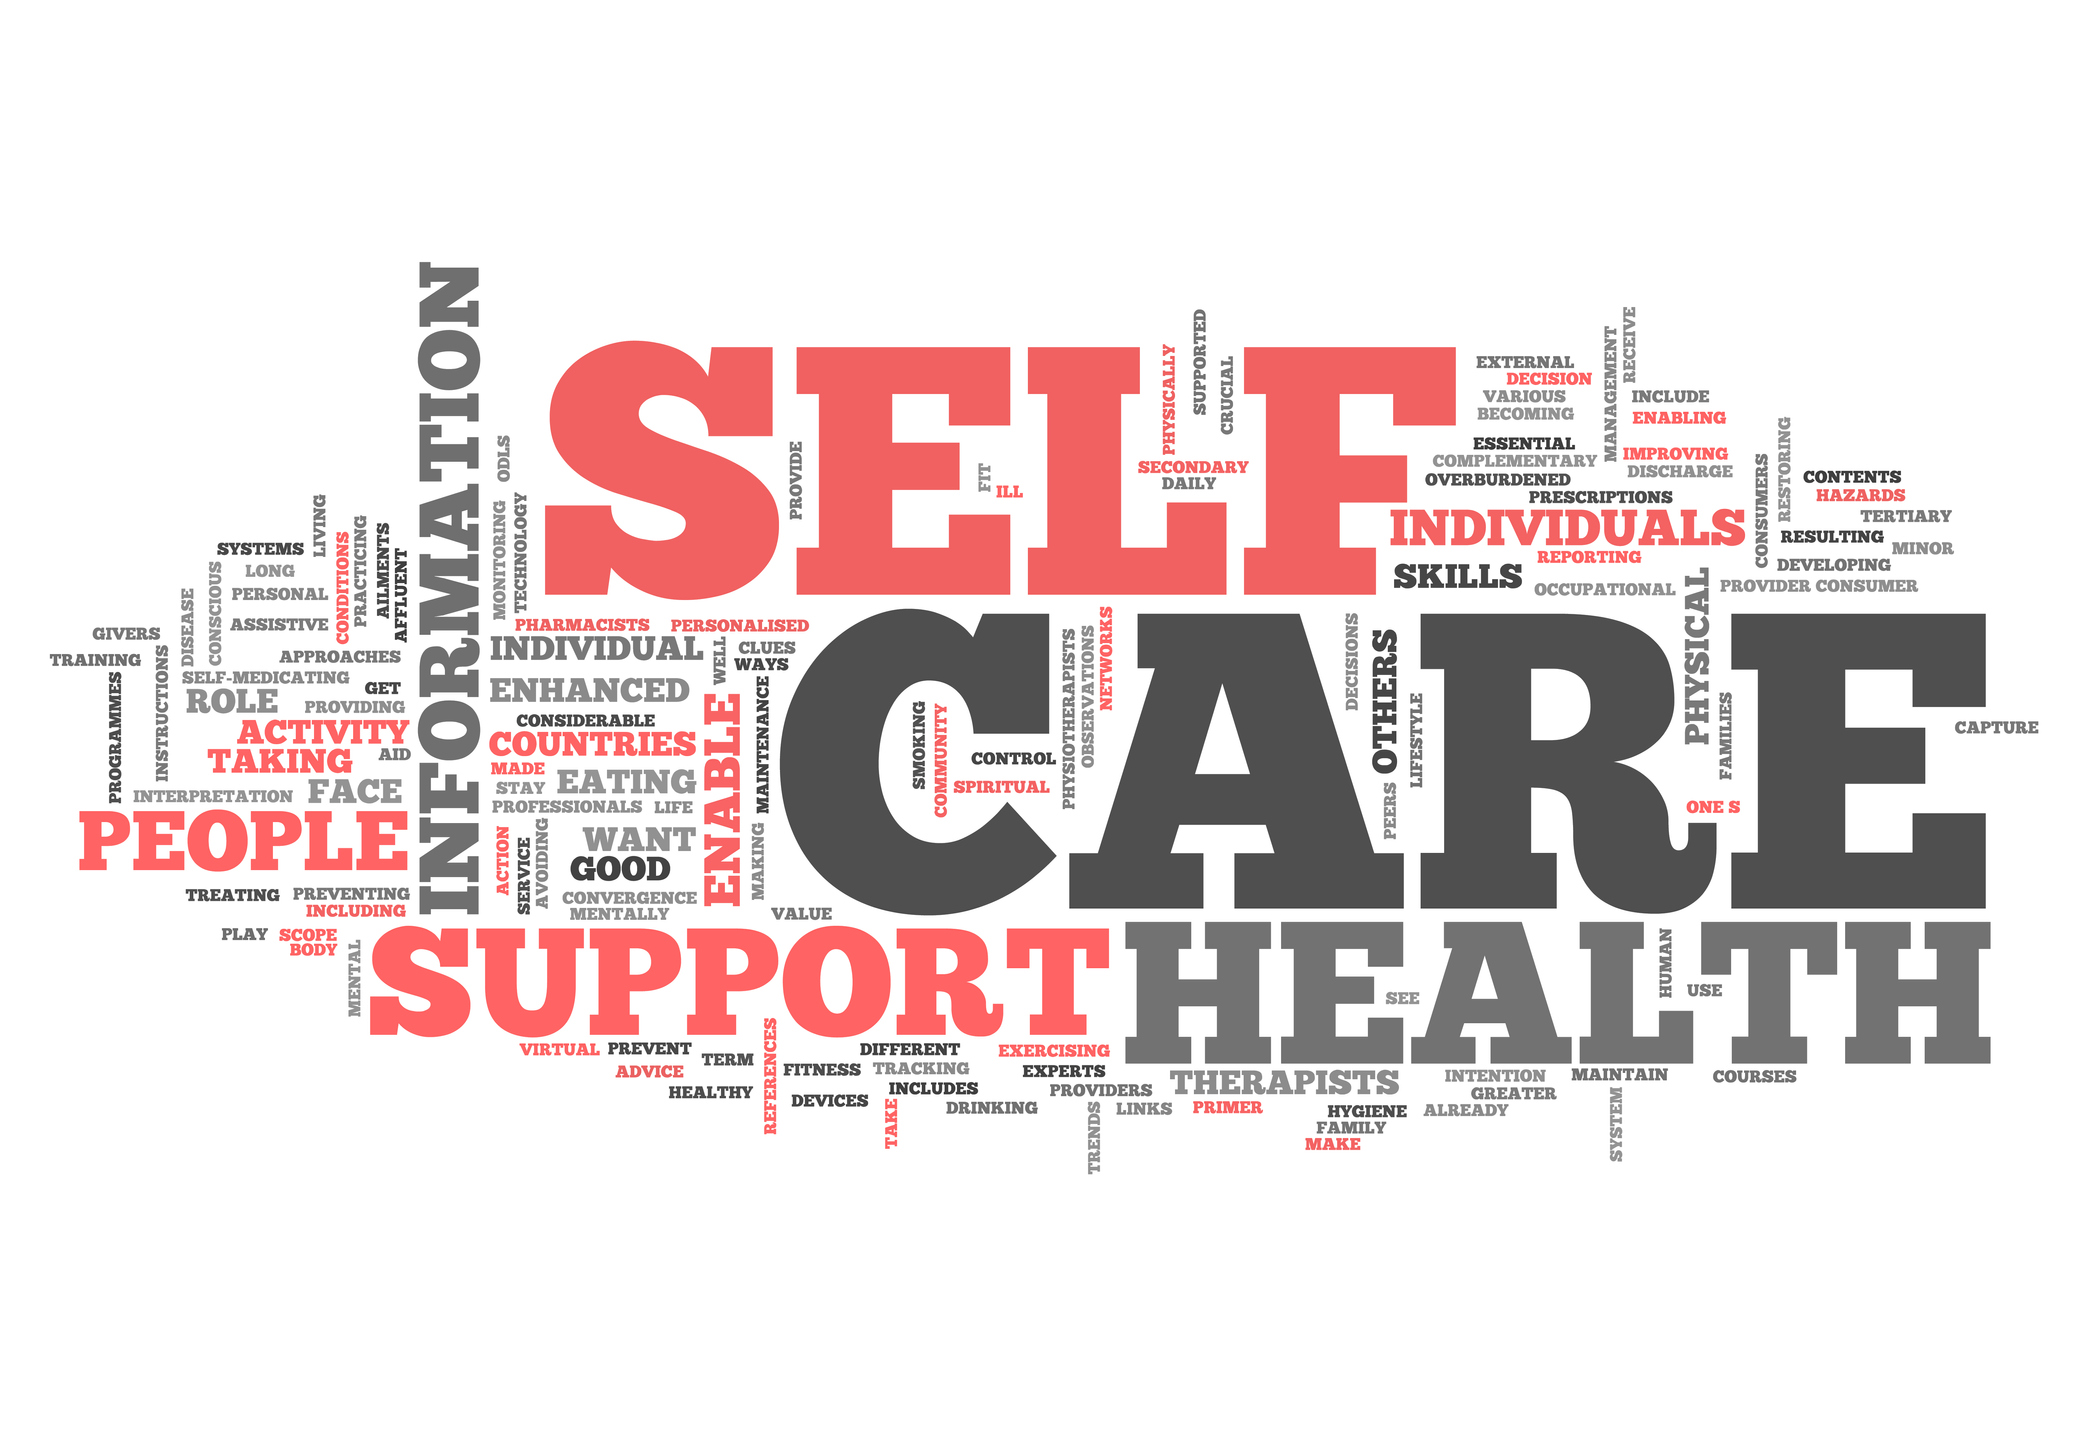 Self care and compassion, Caring in stressful times